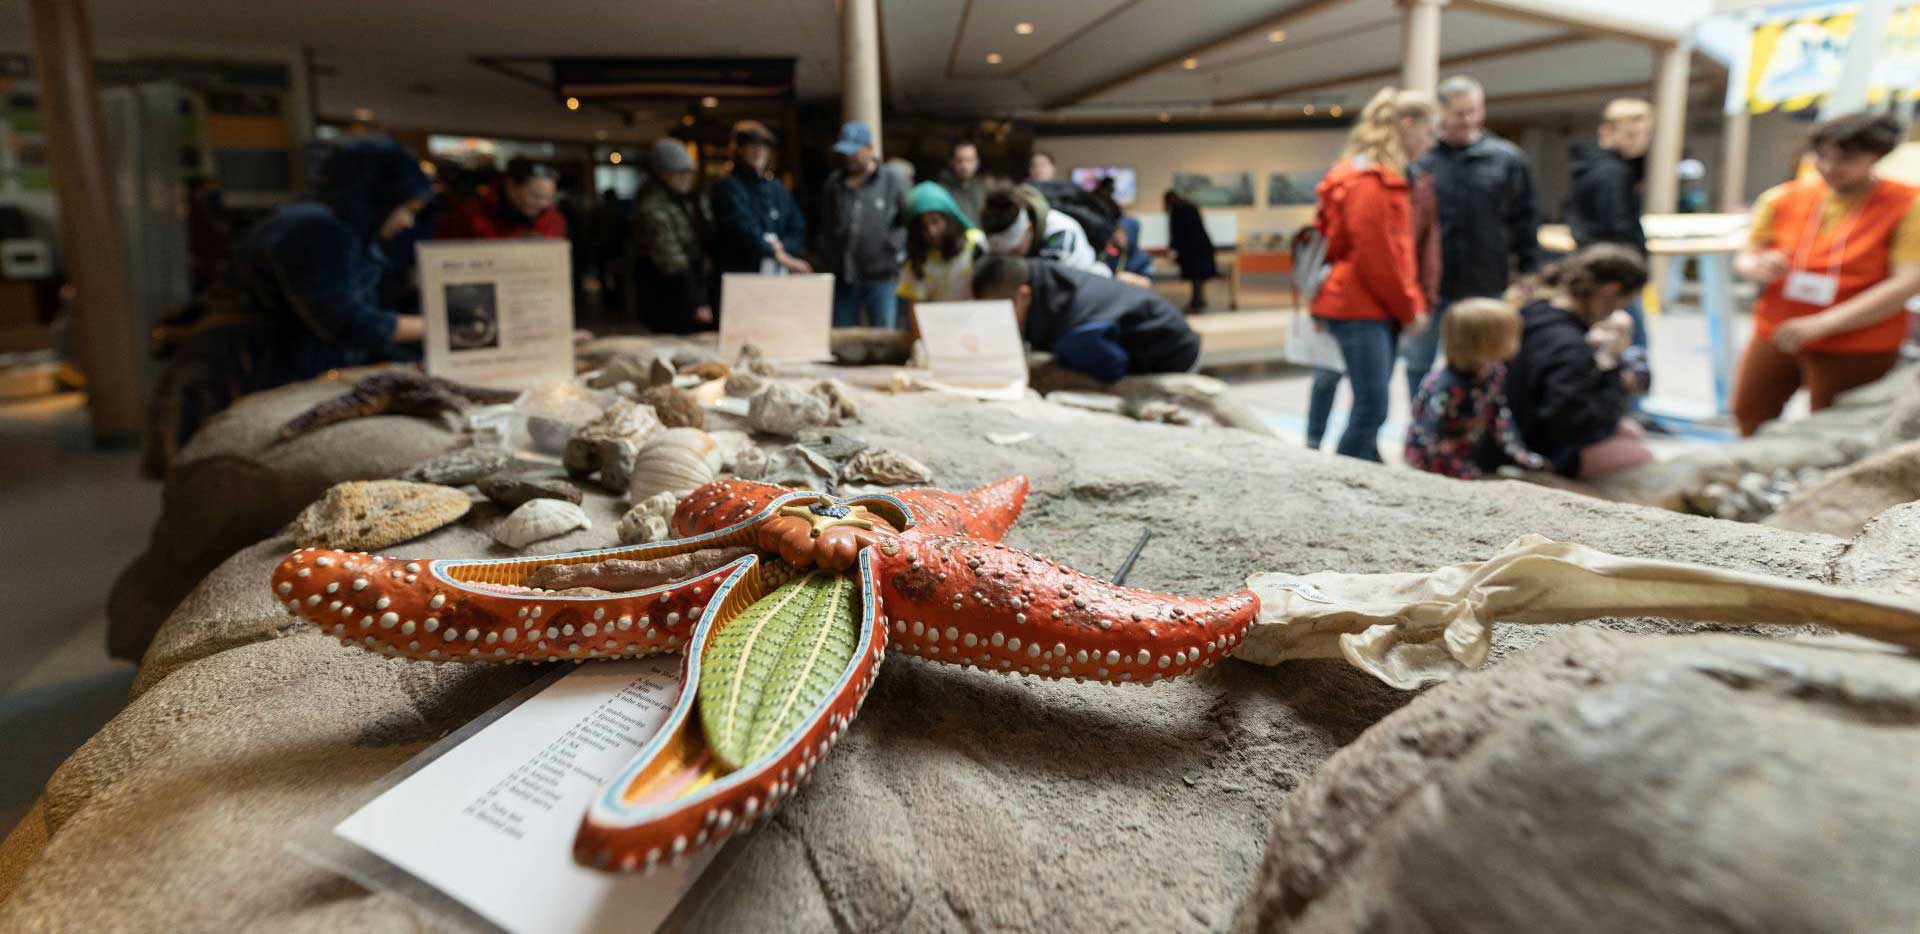 starfish sitting on rock display while people stand around it